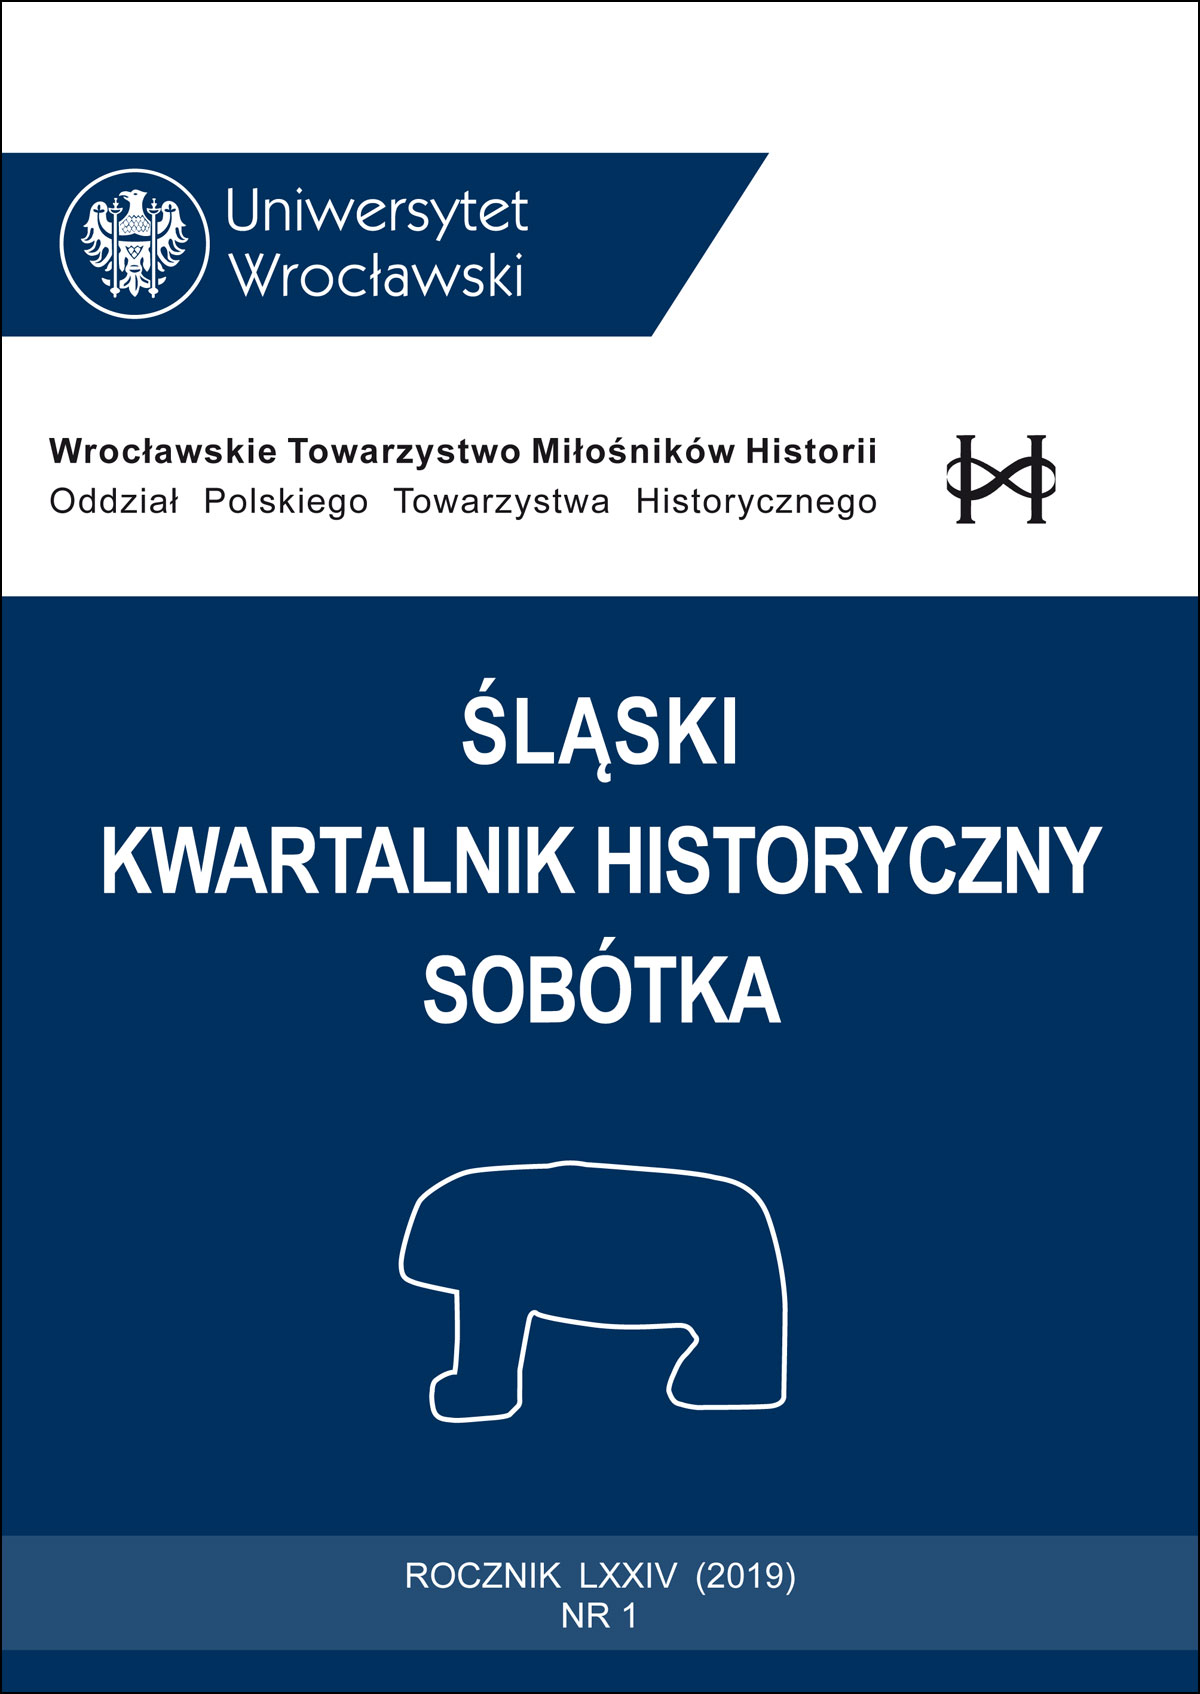 Rosa Luxemburg’s affiliations with Wrocław Cover Image